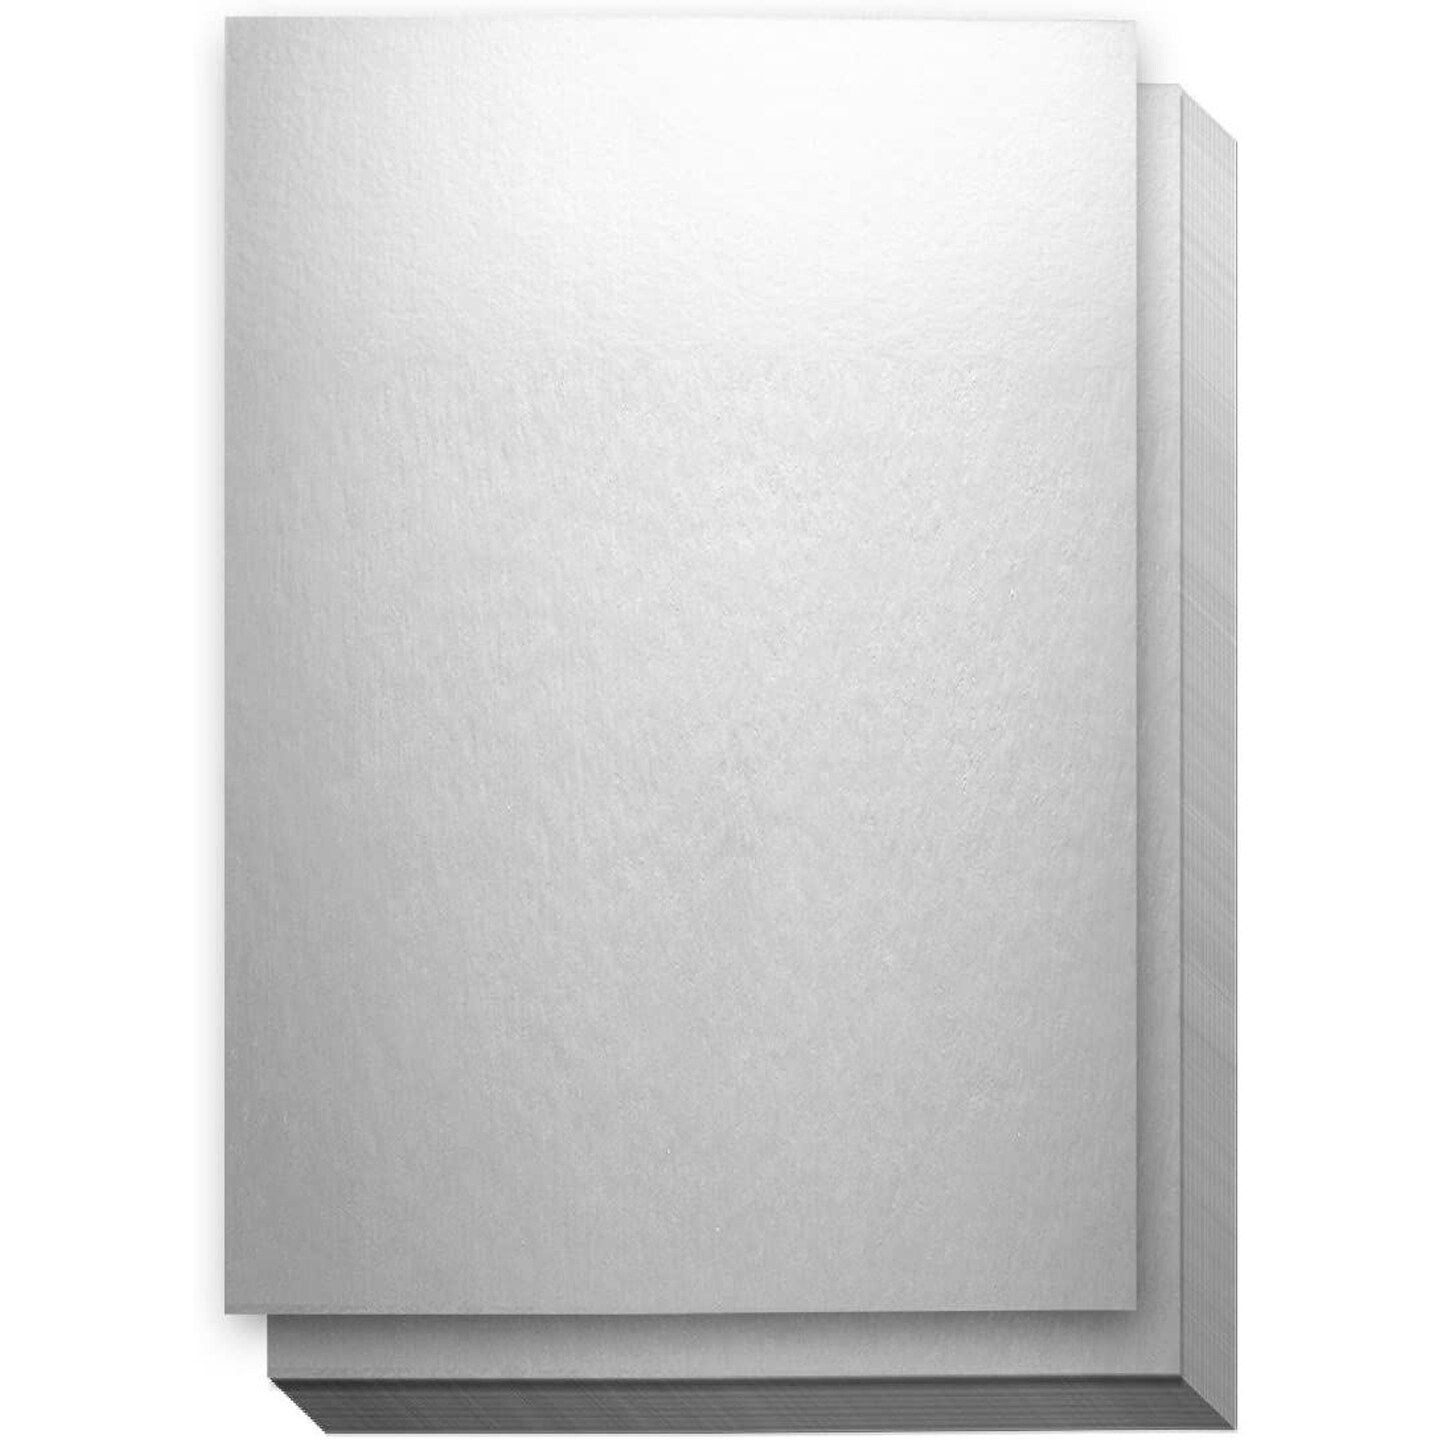 Reflective Metallic Cardstock Paper Sheets (Silver, 8.5 x 11.75 In